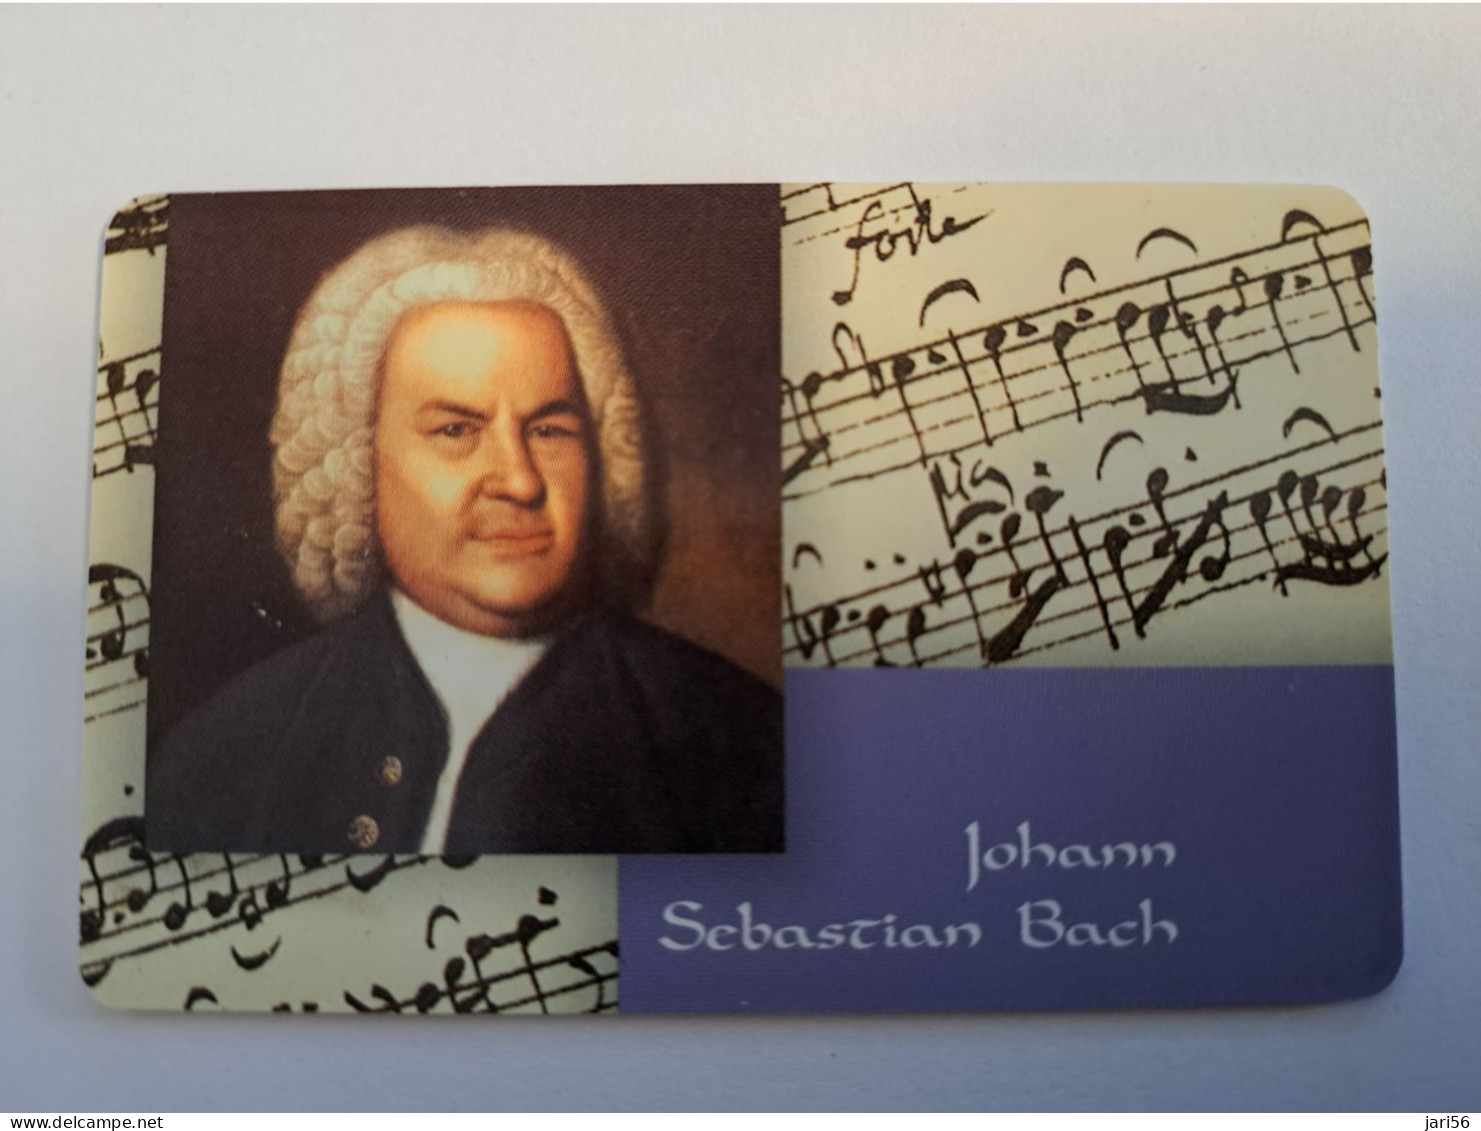 DUITSLAND/ GERMANY  SERIE 5X CHIPCARD  COMPONISTEN / WAGNER/BEETHOVEN/VERDI/MOZART/BACH /  USED    **16176** - K-Series: Kundenserie